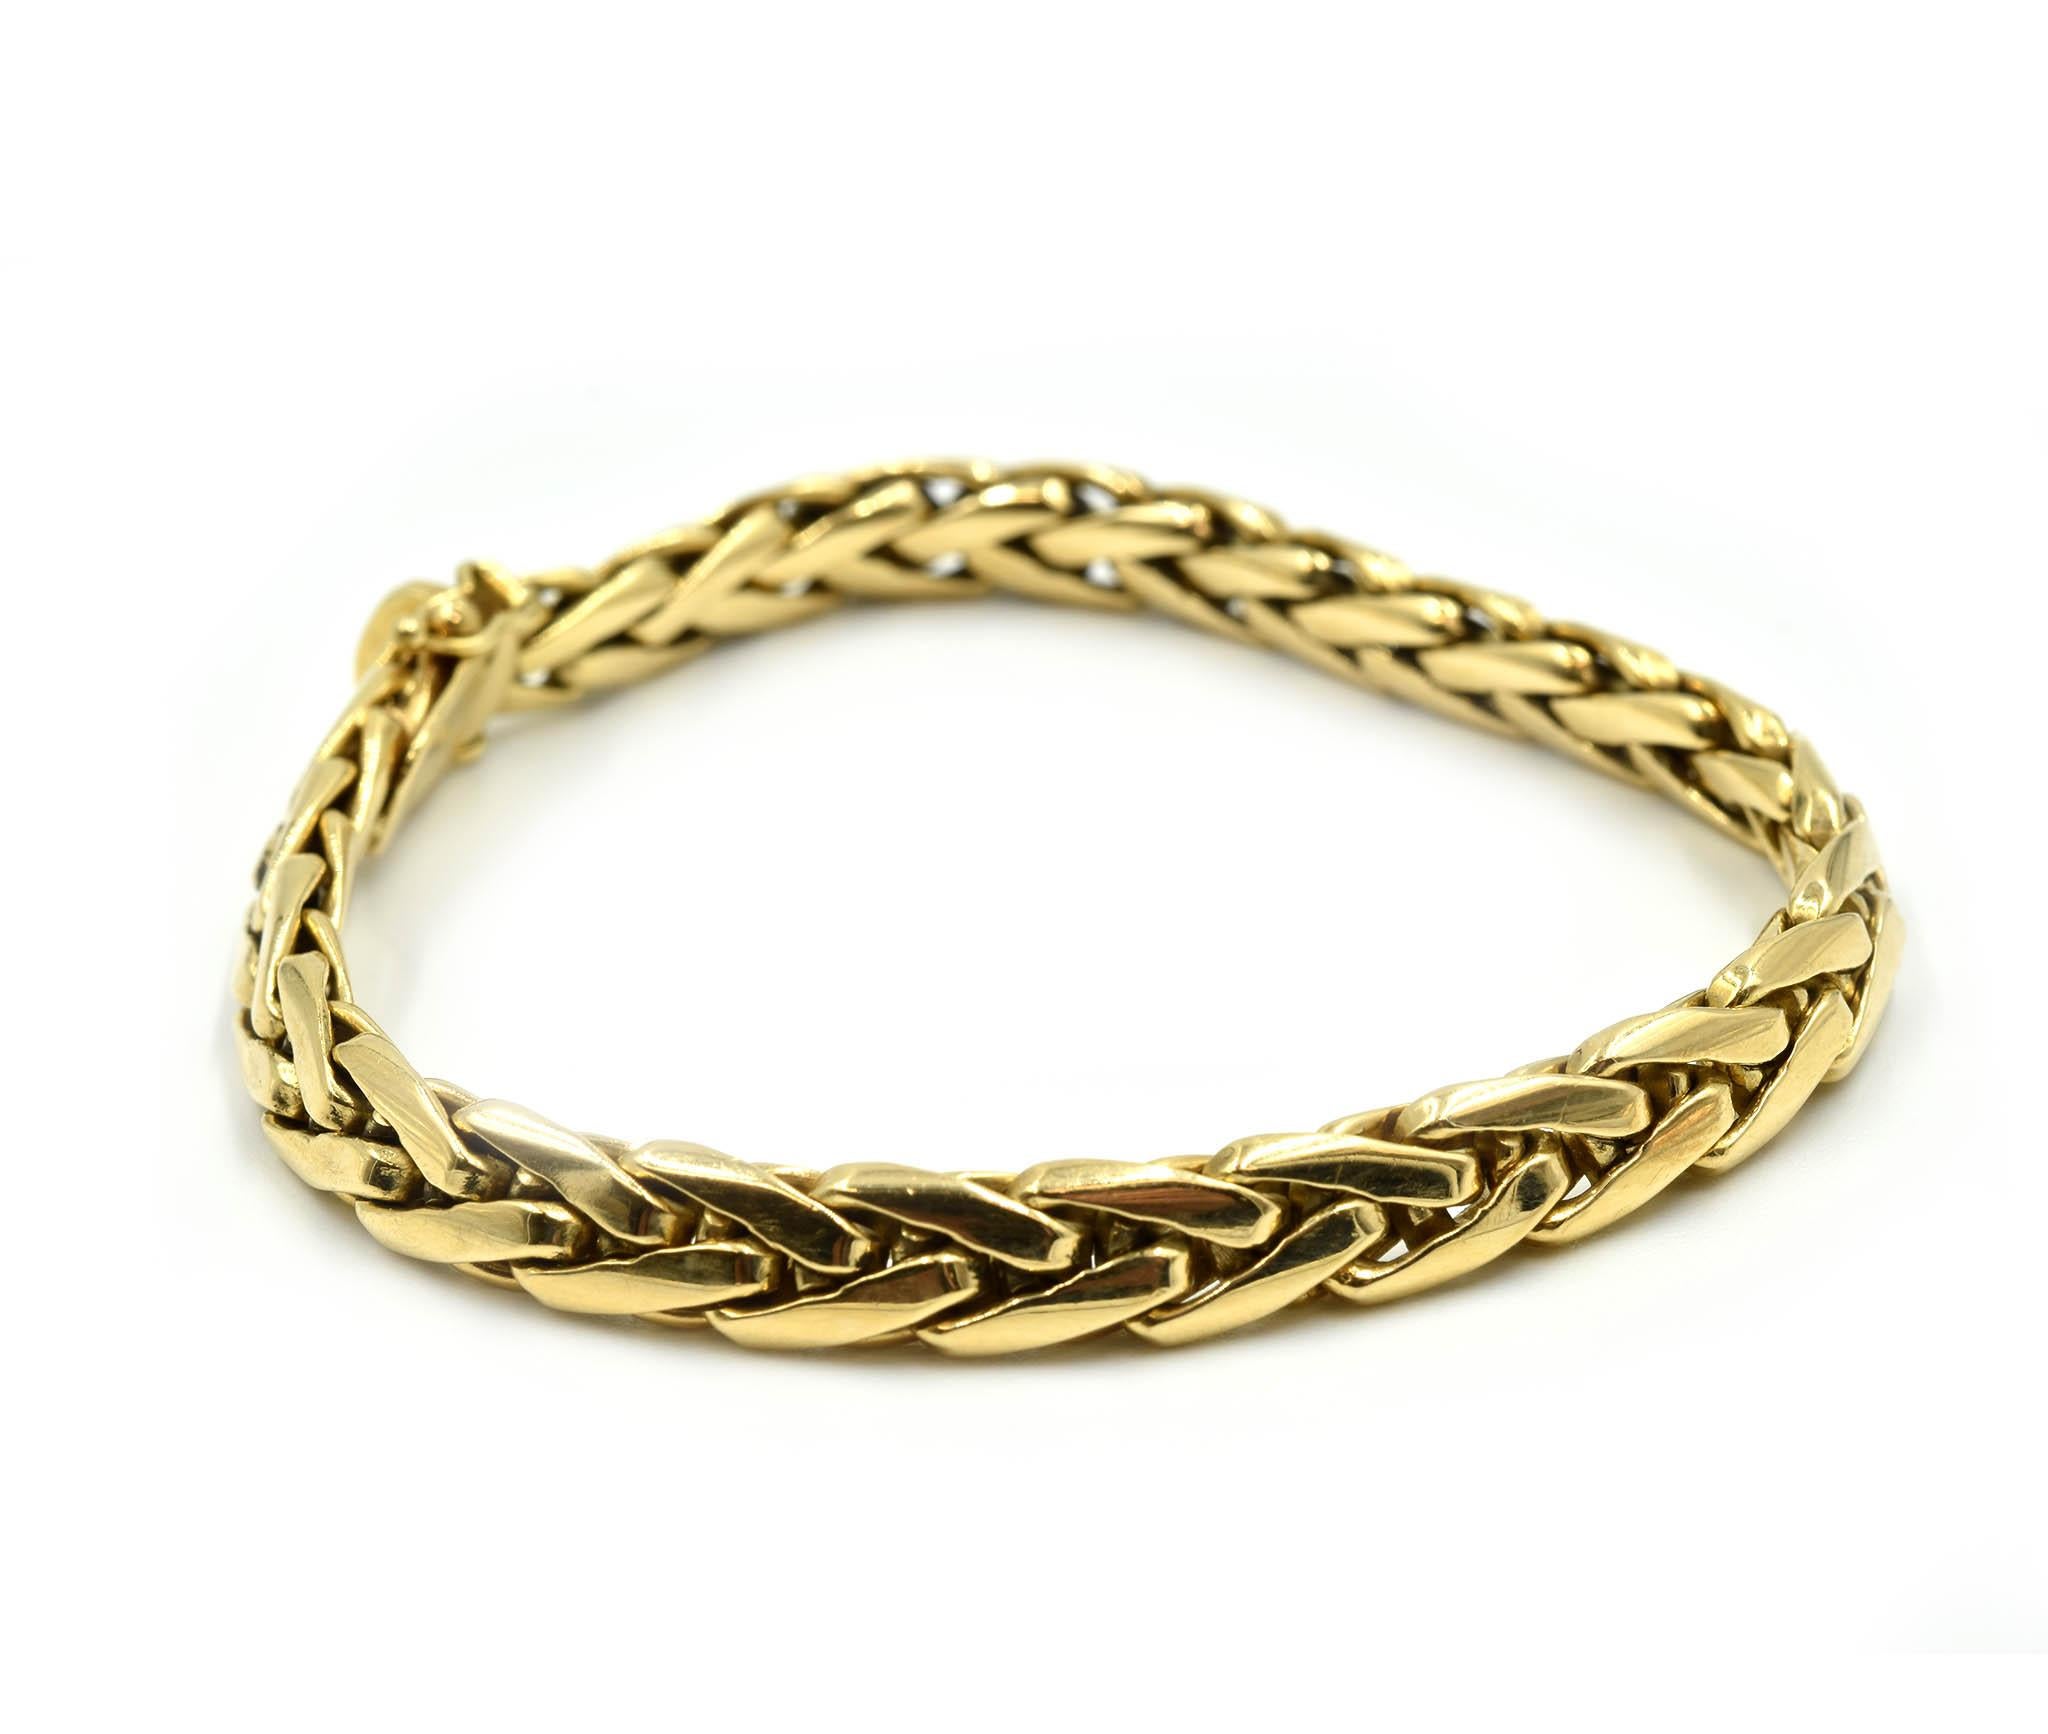 Designer: custom made
Material: 18k yellow gold
Dimensions: 7 inches in length, ¼ inches in width
Weight: 33.28 grams
